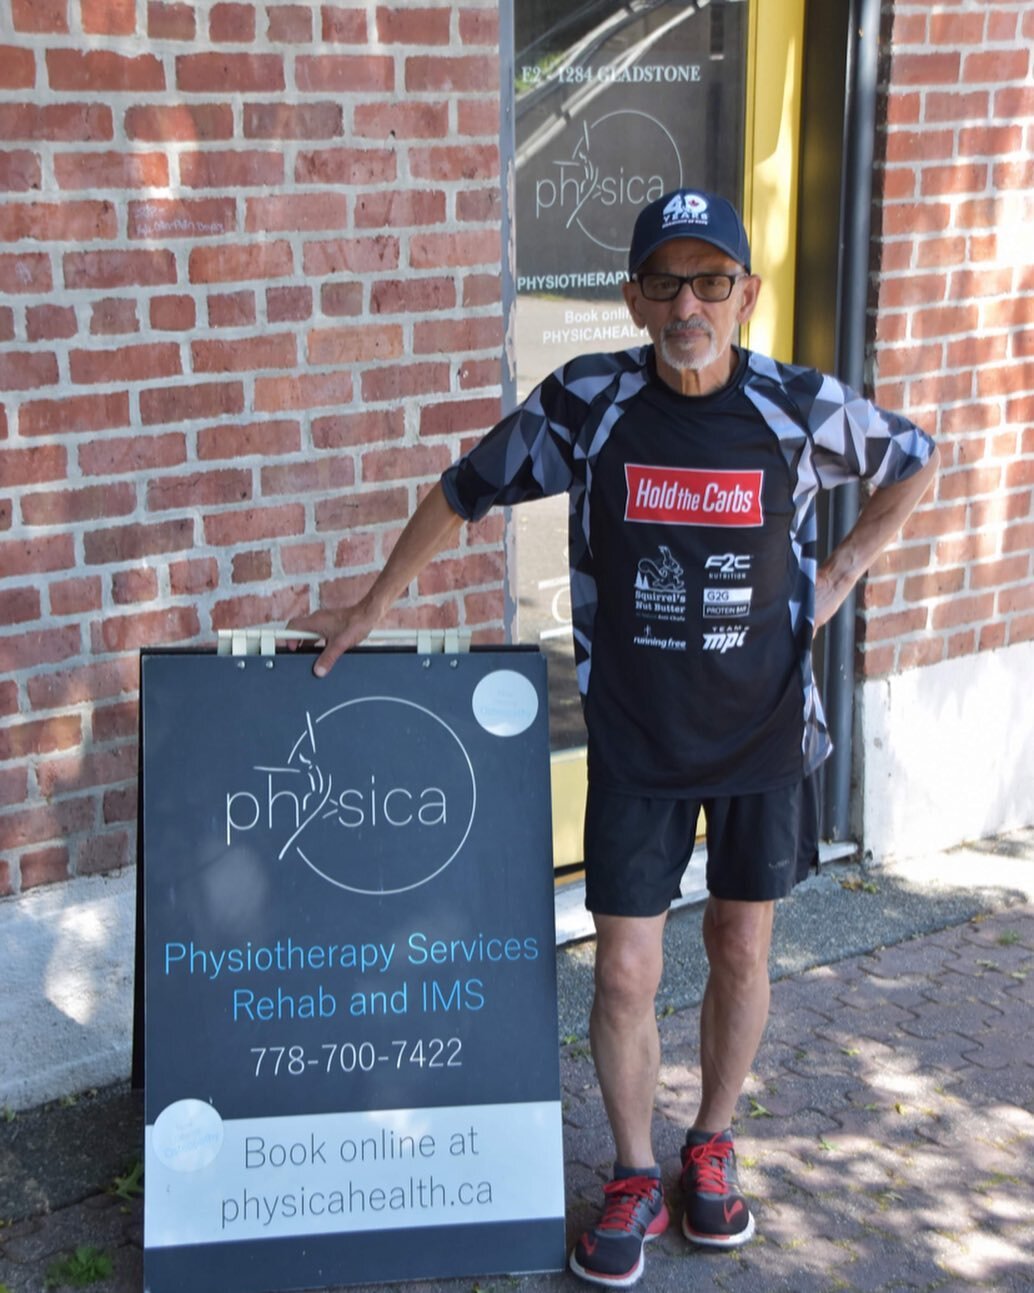 What a pleasure seeing and treating Joseph Camilleri. At 72, he&rsquo;s competing in the world marathon championship in London in October. Here at Physica, we are rooting for him to reach his target of 3 hours and 20mins. What a motivation for everyo